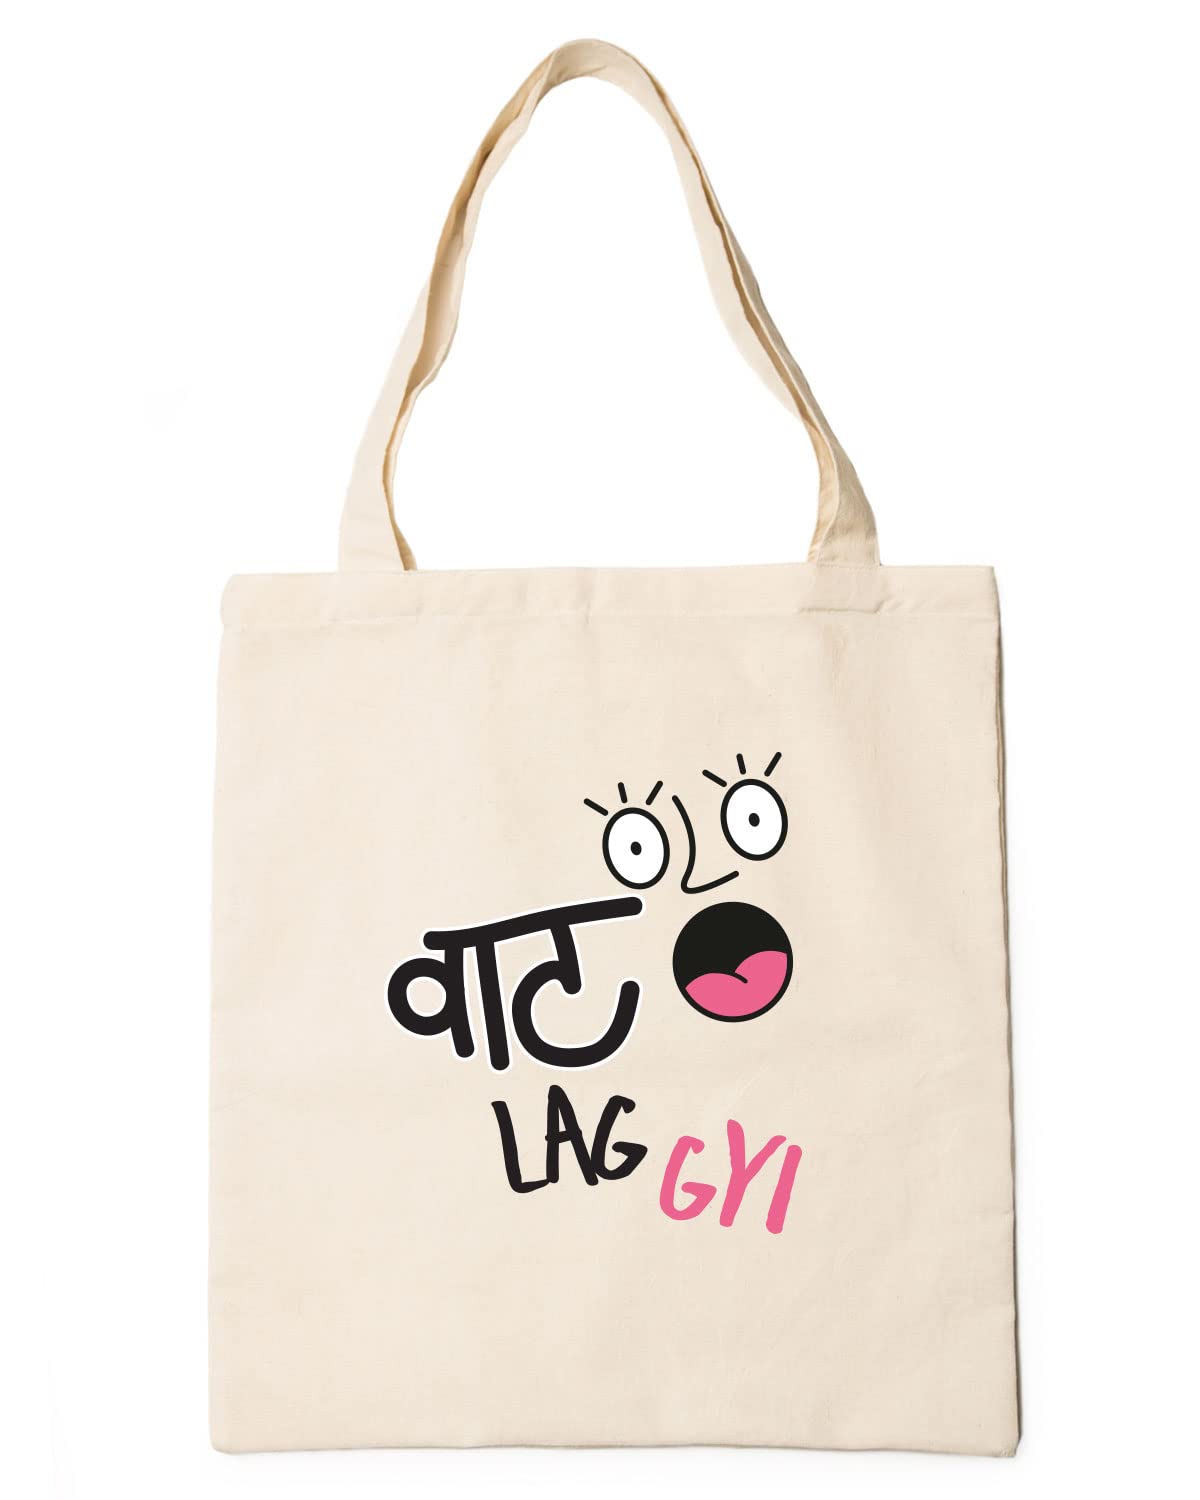 The Pink Magnet Vaat Lag Gyi Tote Bag - Canvas Tote Bag for Women | Printed Multipurpose Cotton Bags | Cute Hand Bag for Girls | Best for College, Travel, Grocery | Reusable Shopping Bag | Eco-Friendly Tote Bag